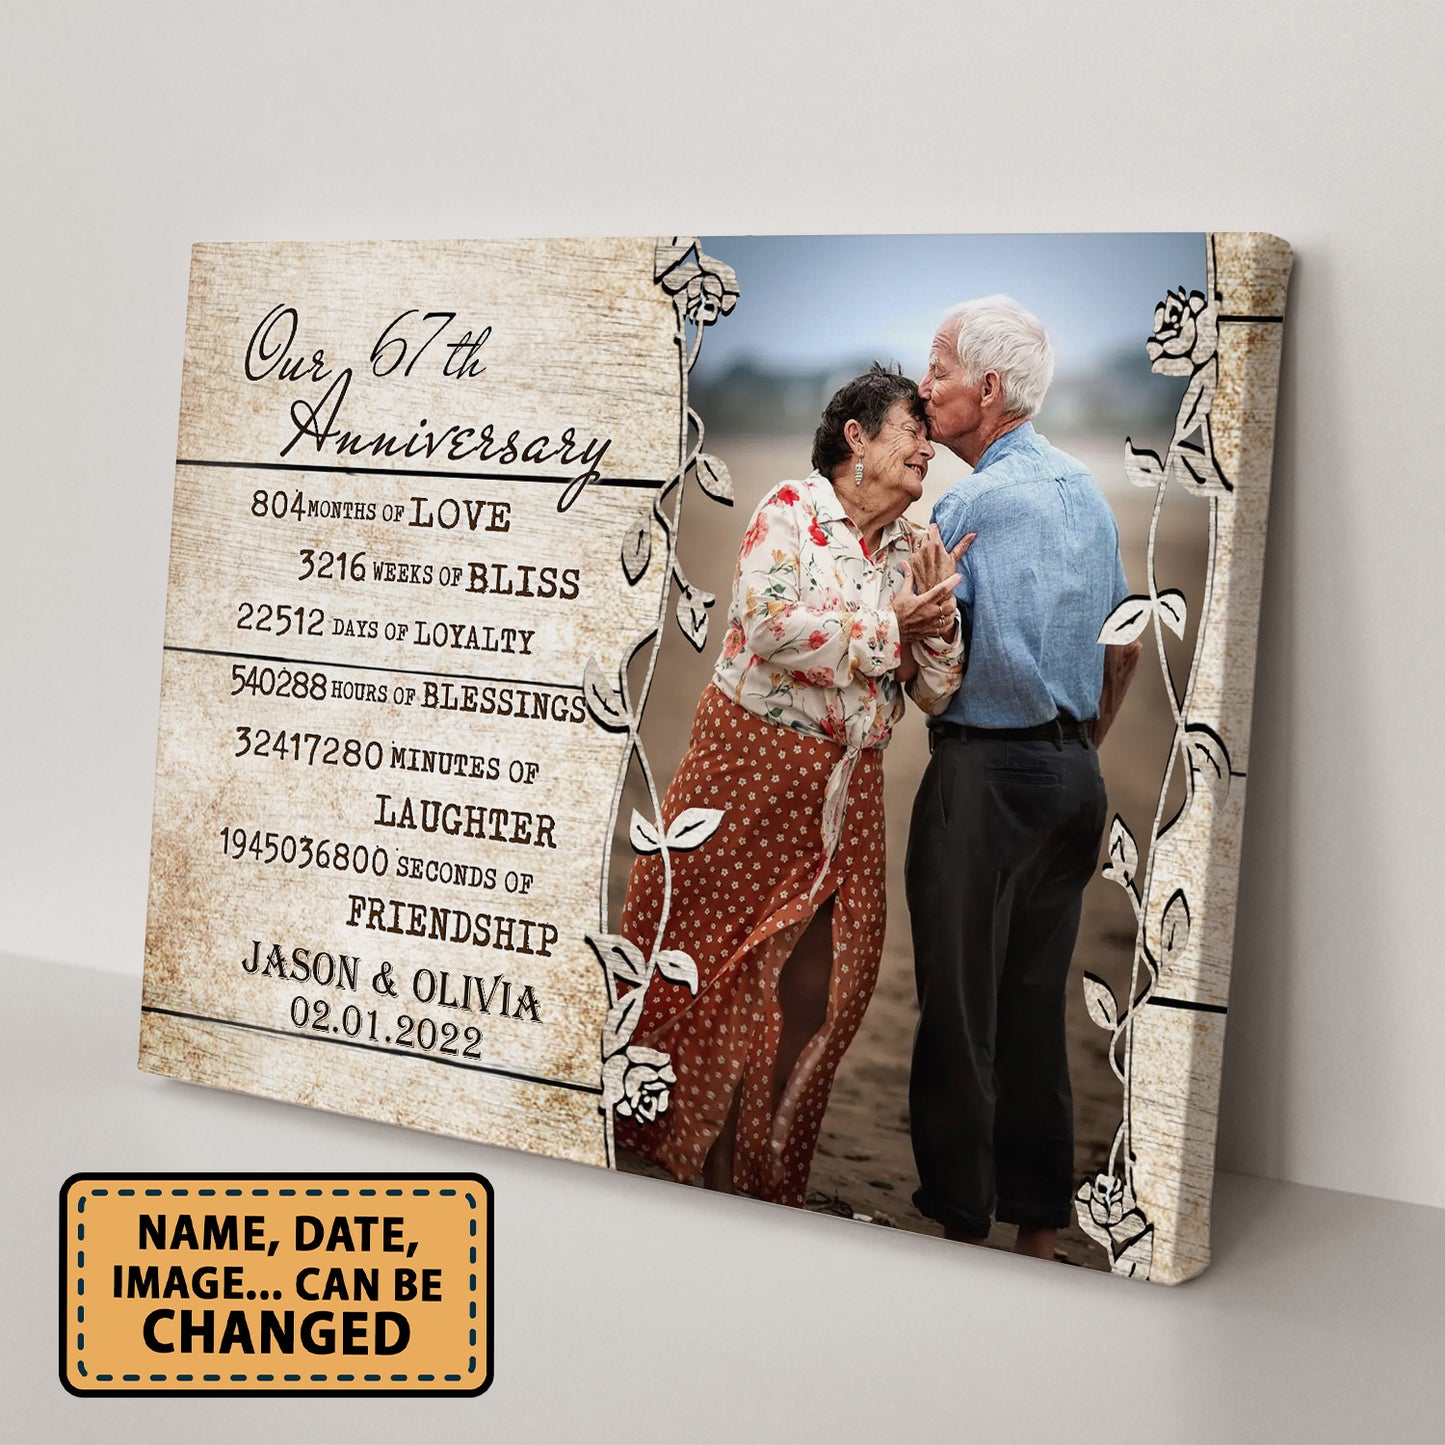 Our 67th Anniversary Timeless love Valentine Gift Personalized Canvas